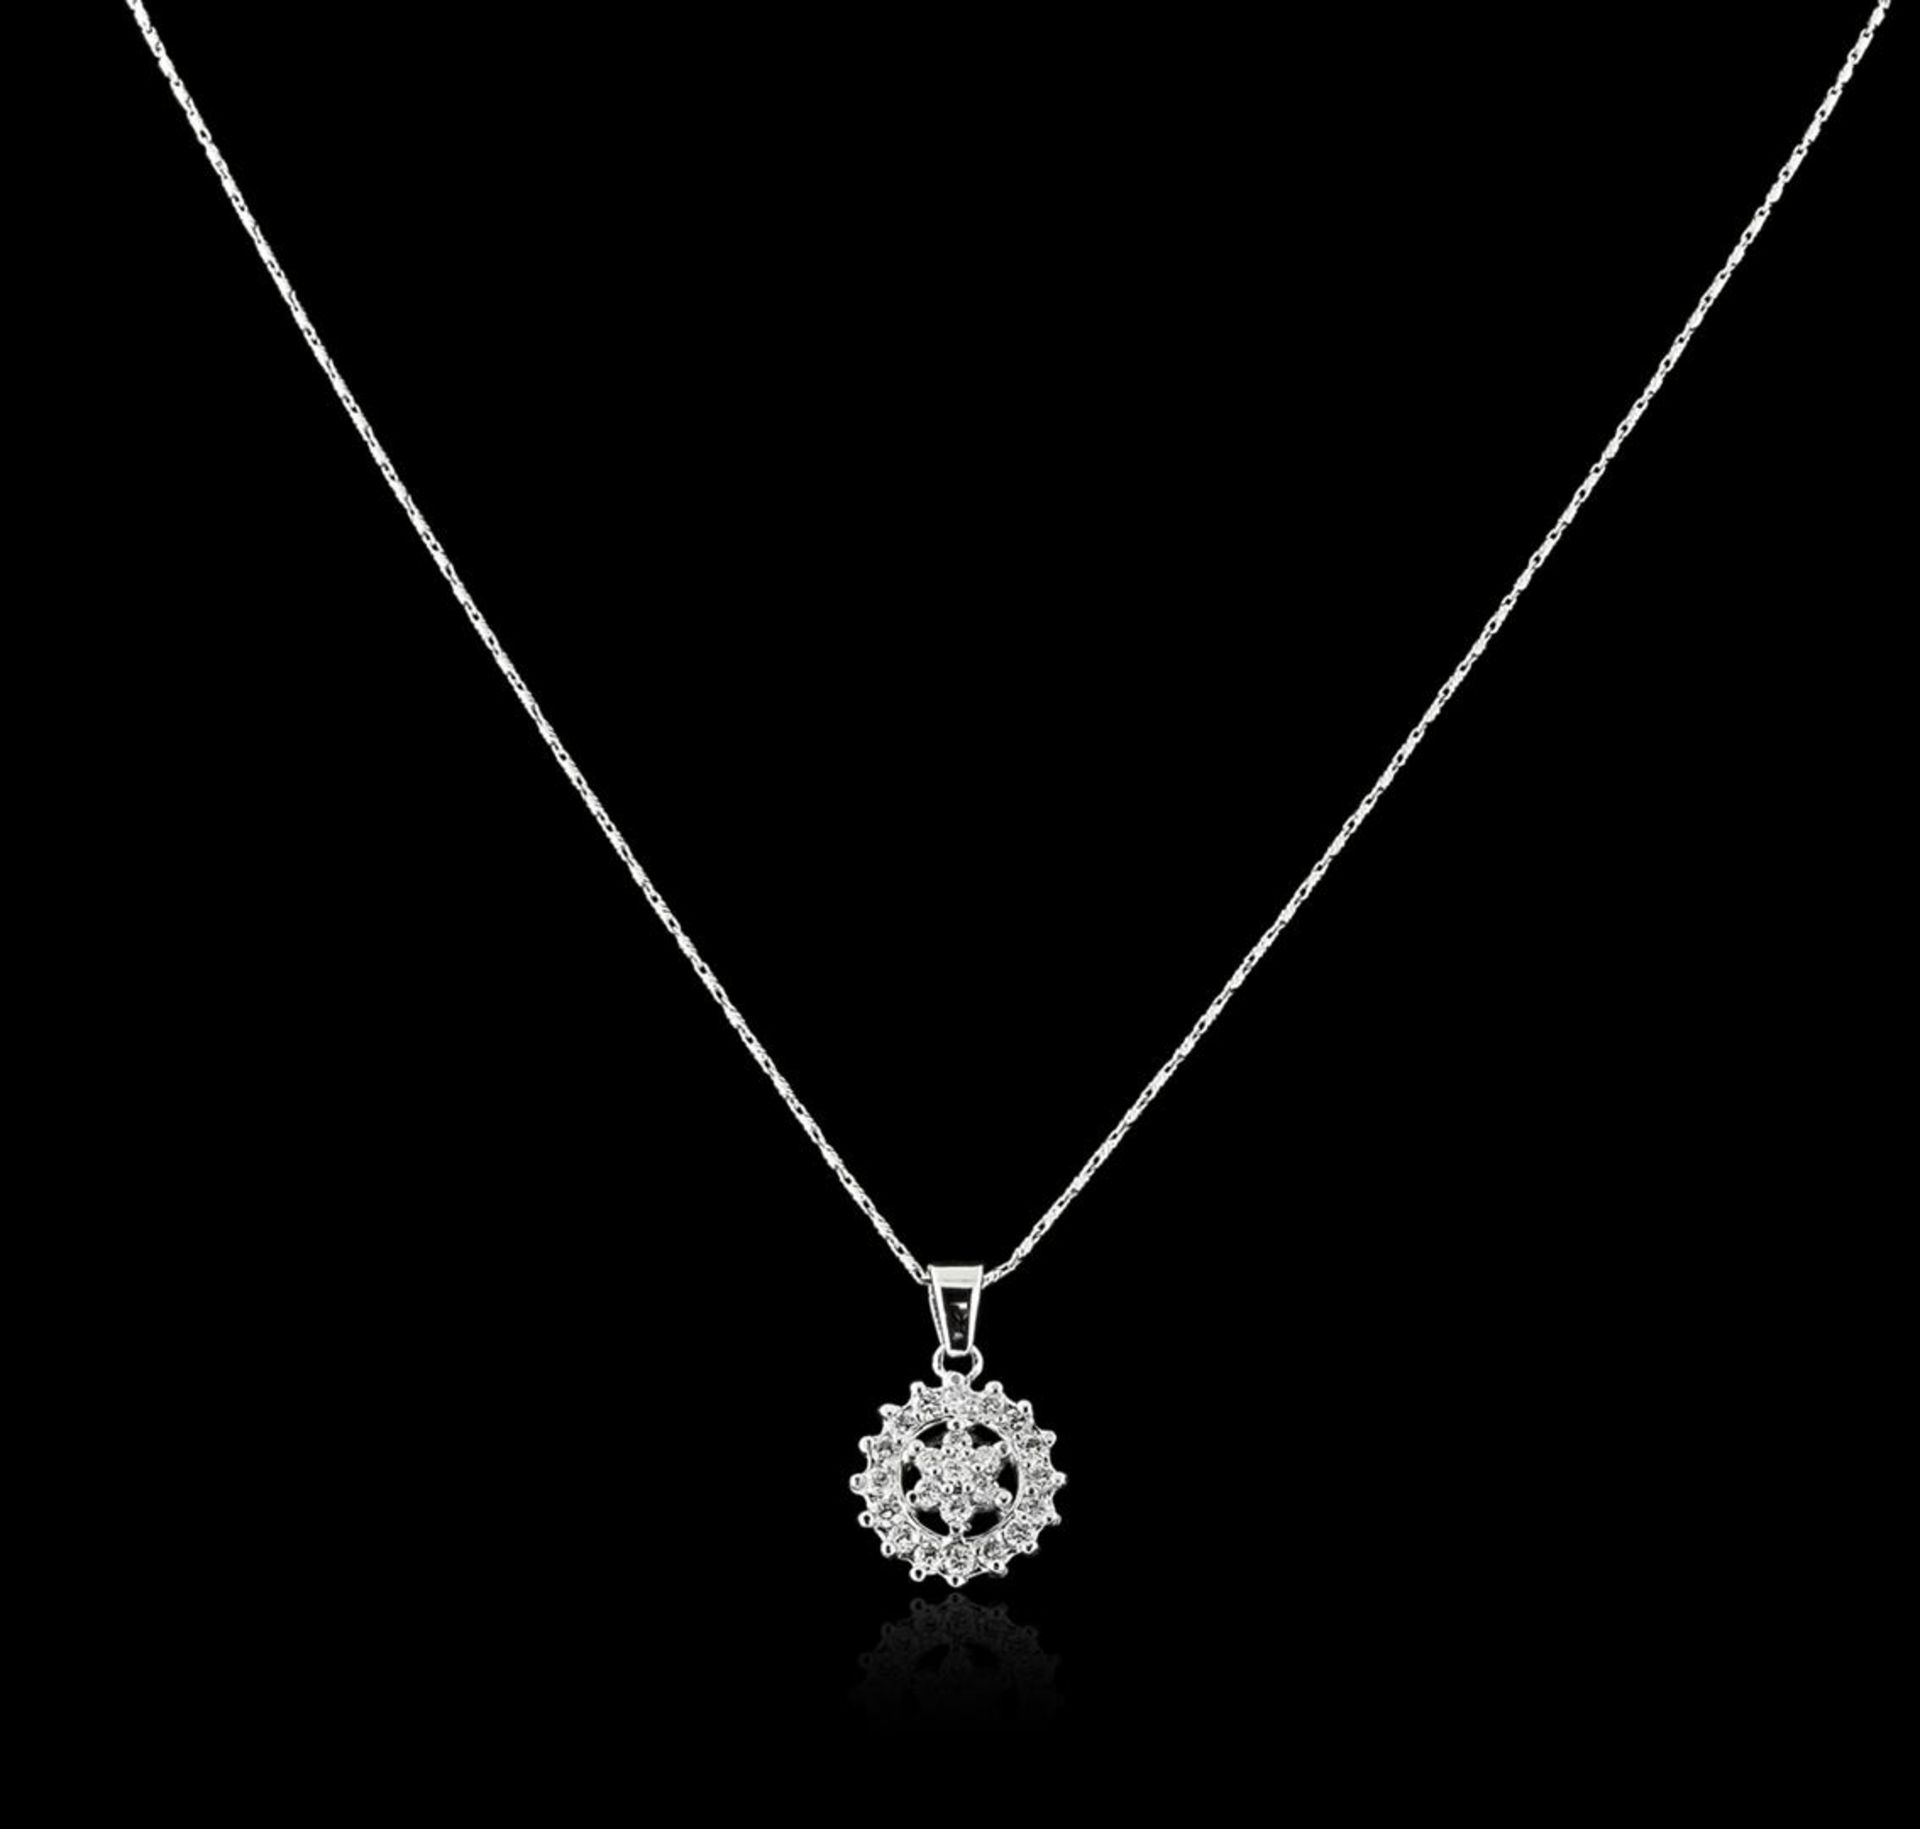 14KT White Gold 0.71 ctw Diamond Pendant With Chain - Image 2 of 3